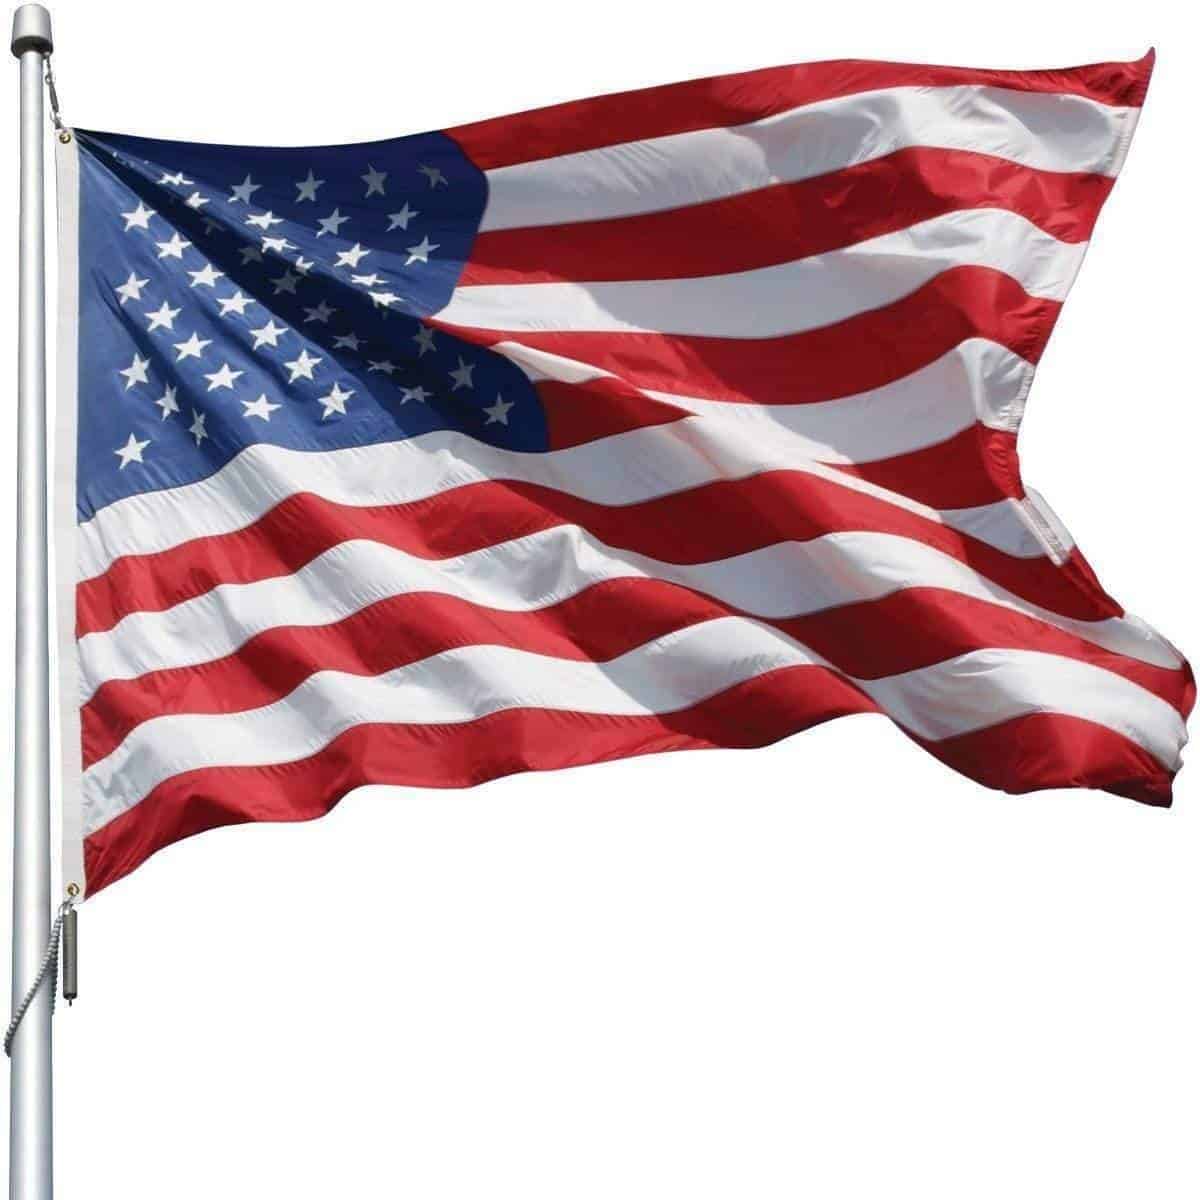 USA Heavy duty Nylon US Flags with 3 by 5 Foot American Flag 3x5 FT Outdoor 